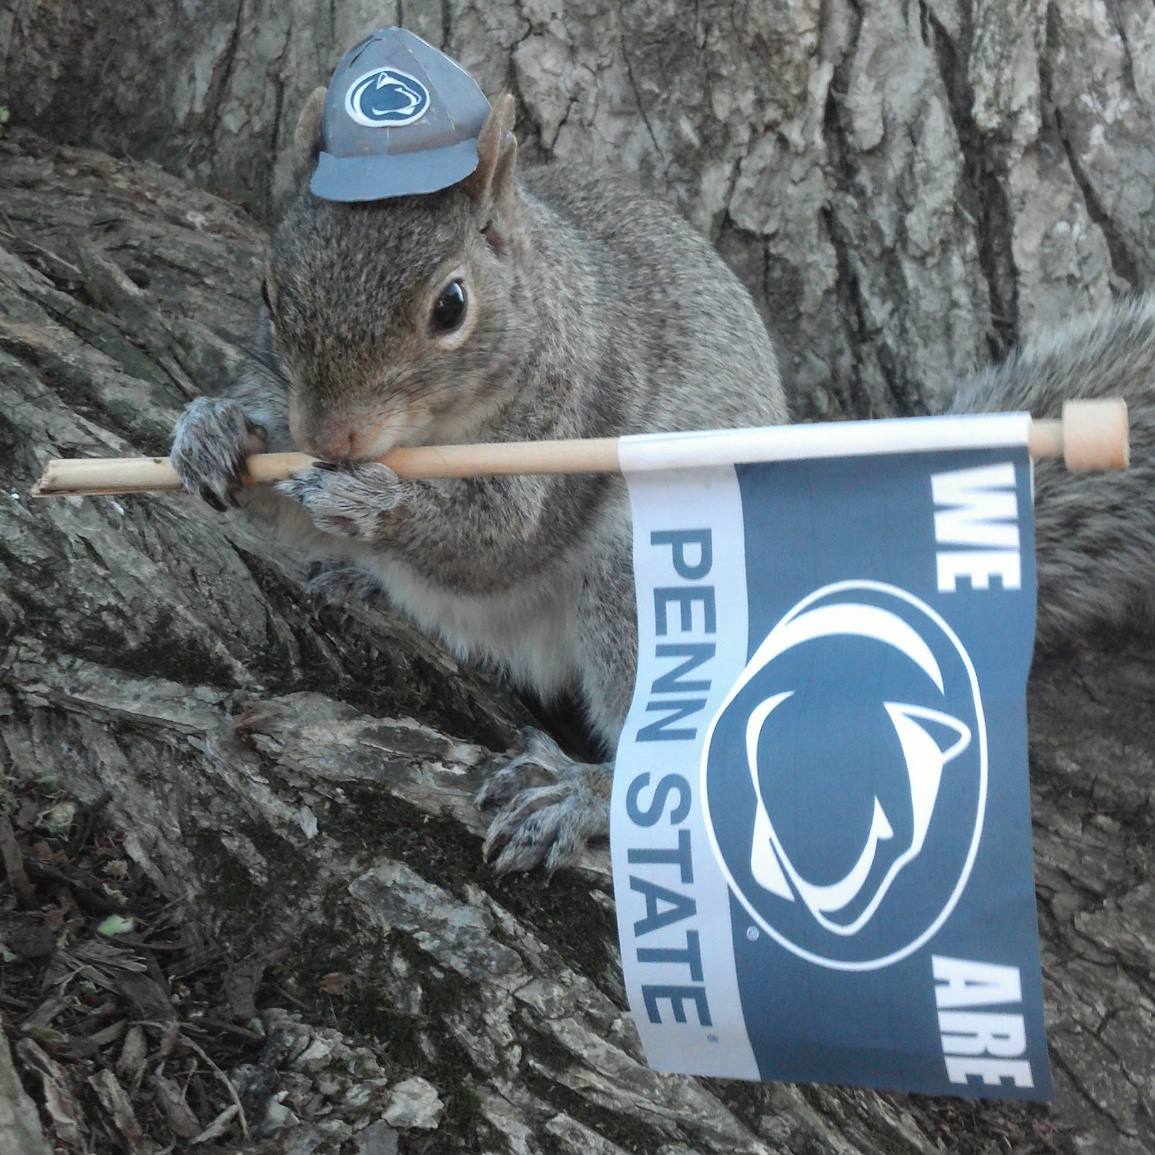 Sneezy The Penn State Squirrel